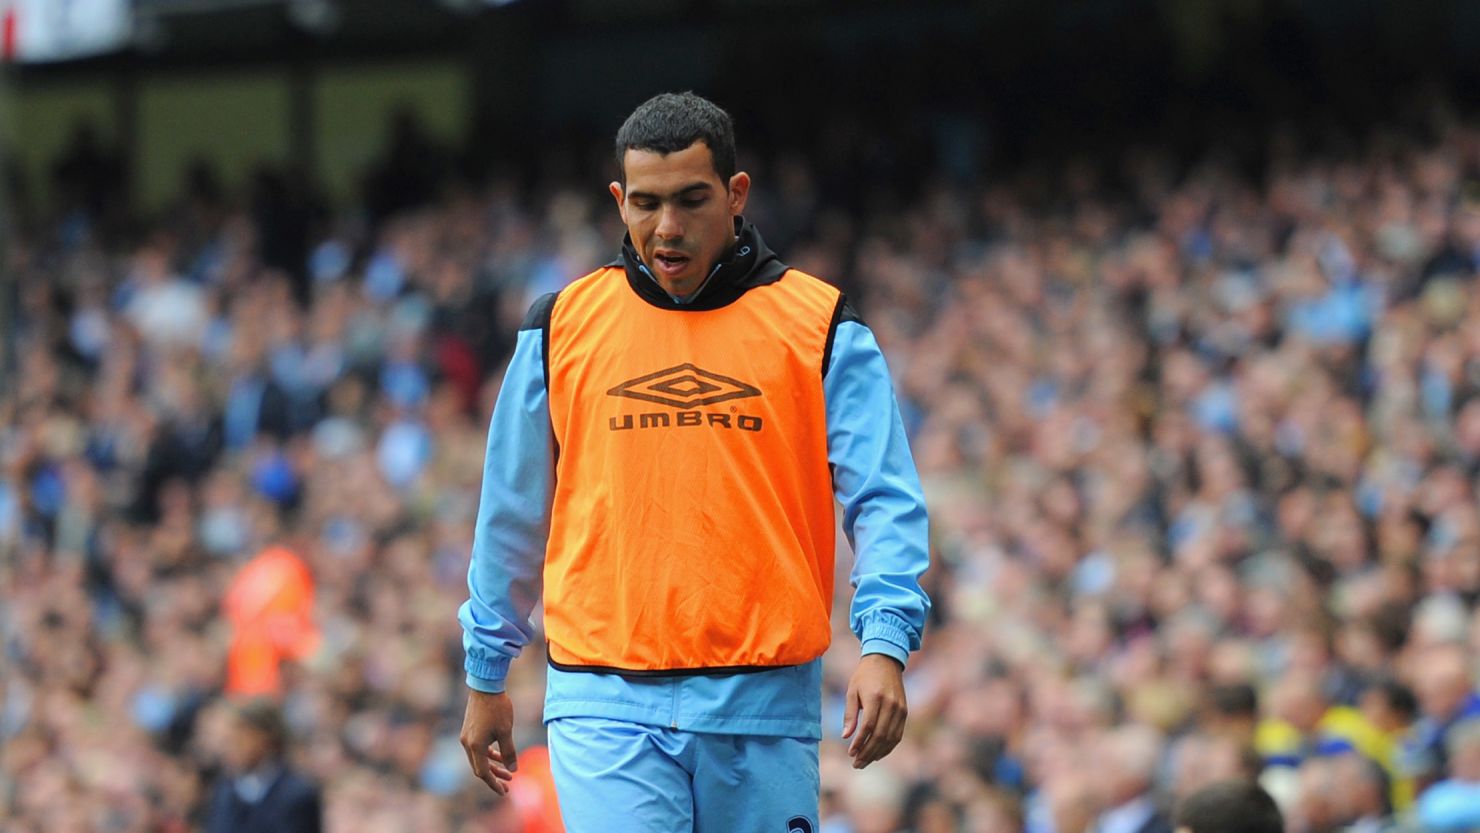 Manchester City's Carlos Tevez captained the English leaders to FA Cup success last season.